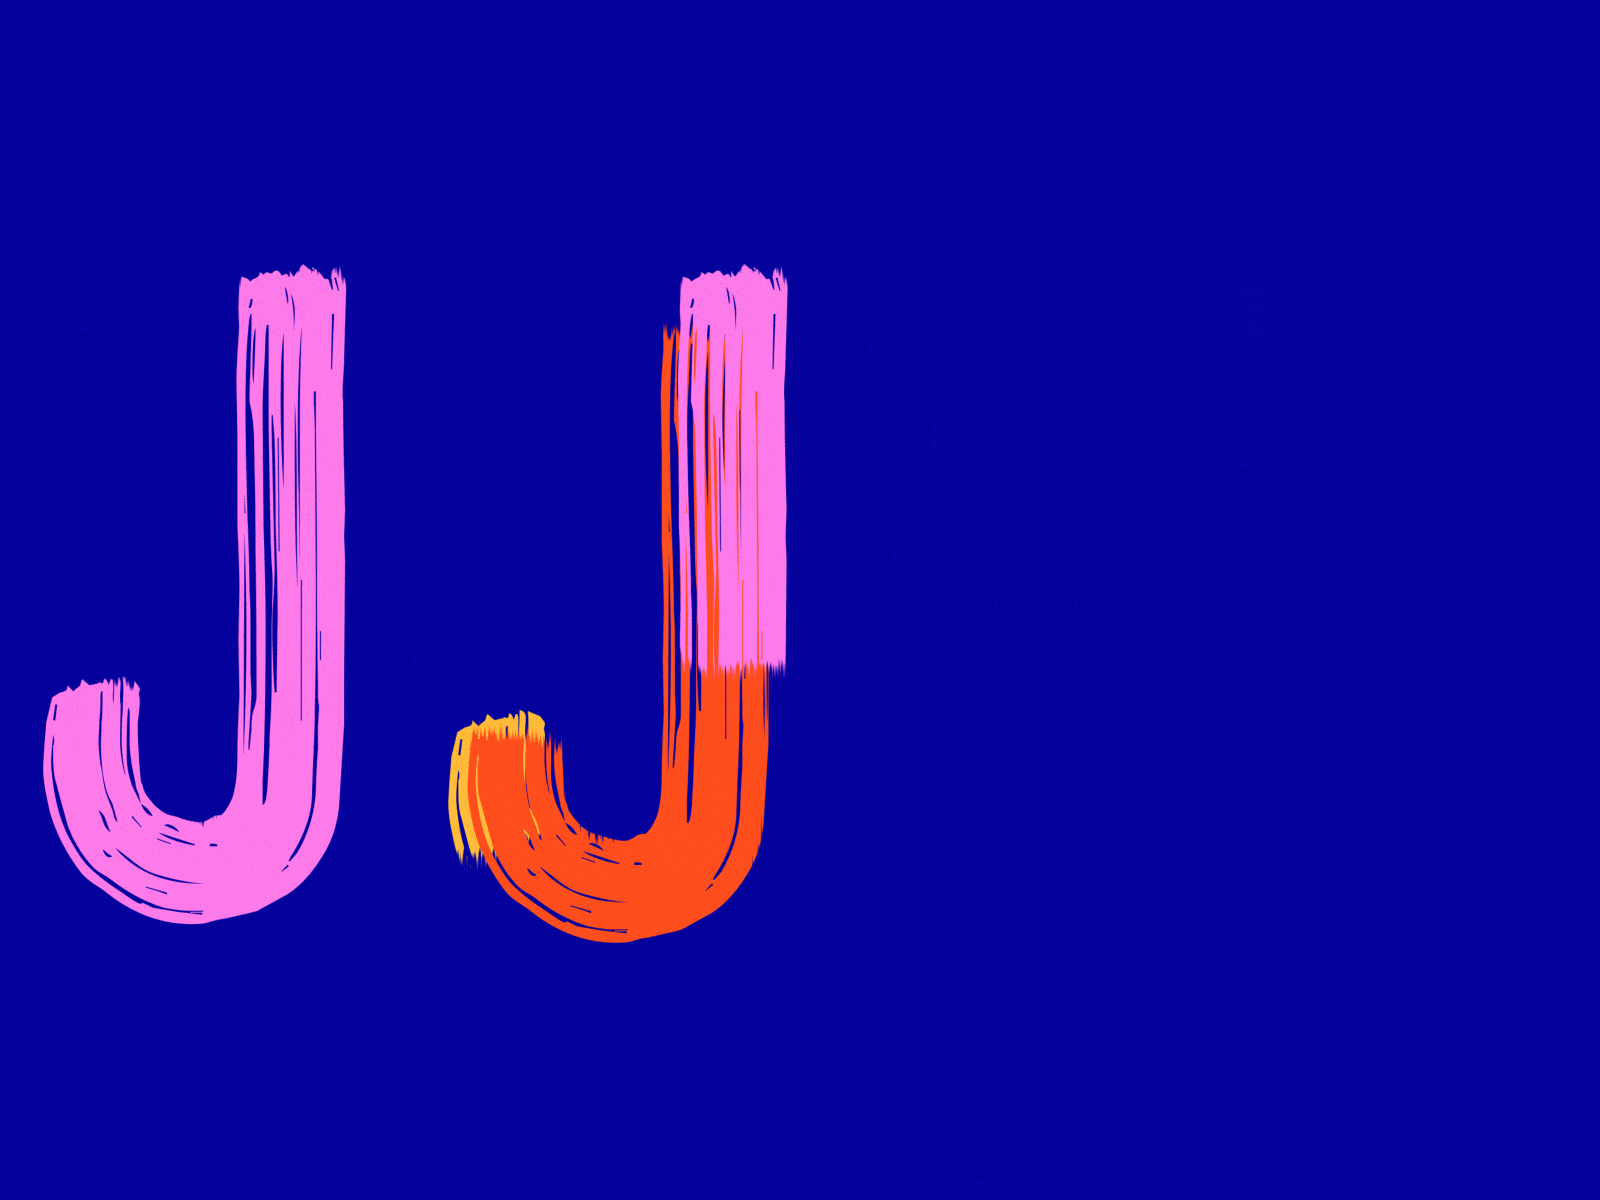 36 Days of Type - J 36daysoftype 36daysoftype08 36dot ae after effects animated type animation animography colors design kinetic kinetic type kinetic typography motion motion design motion graphic motion graphics typography